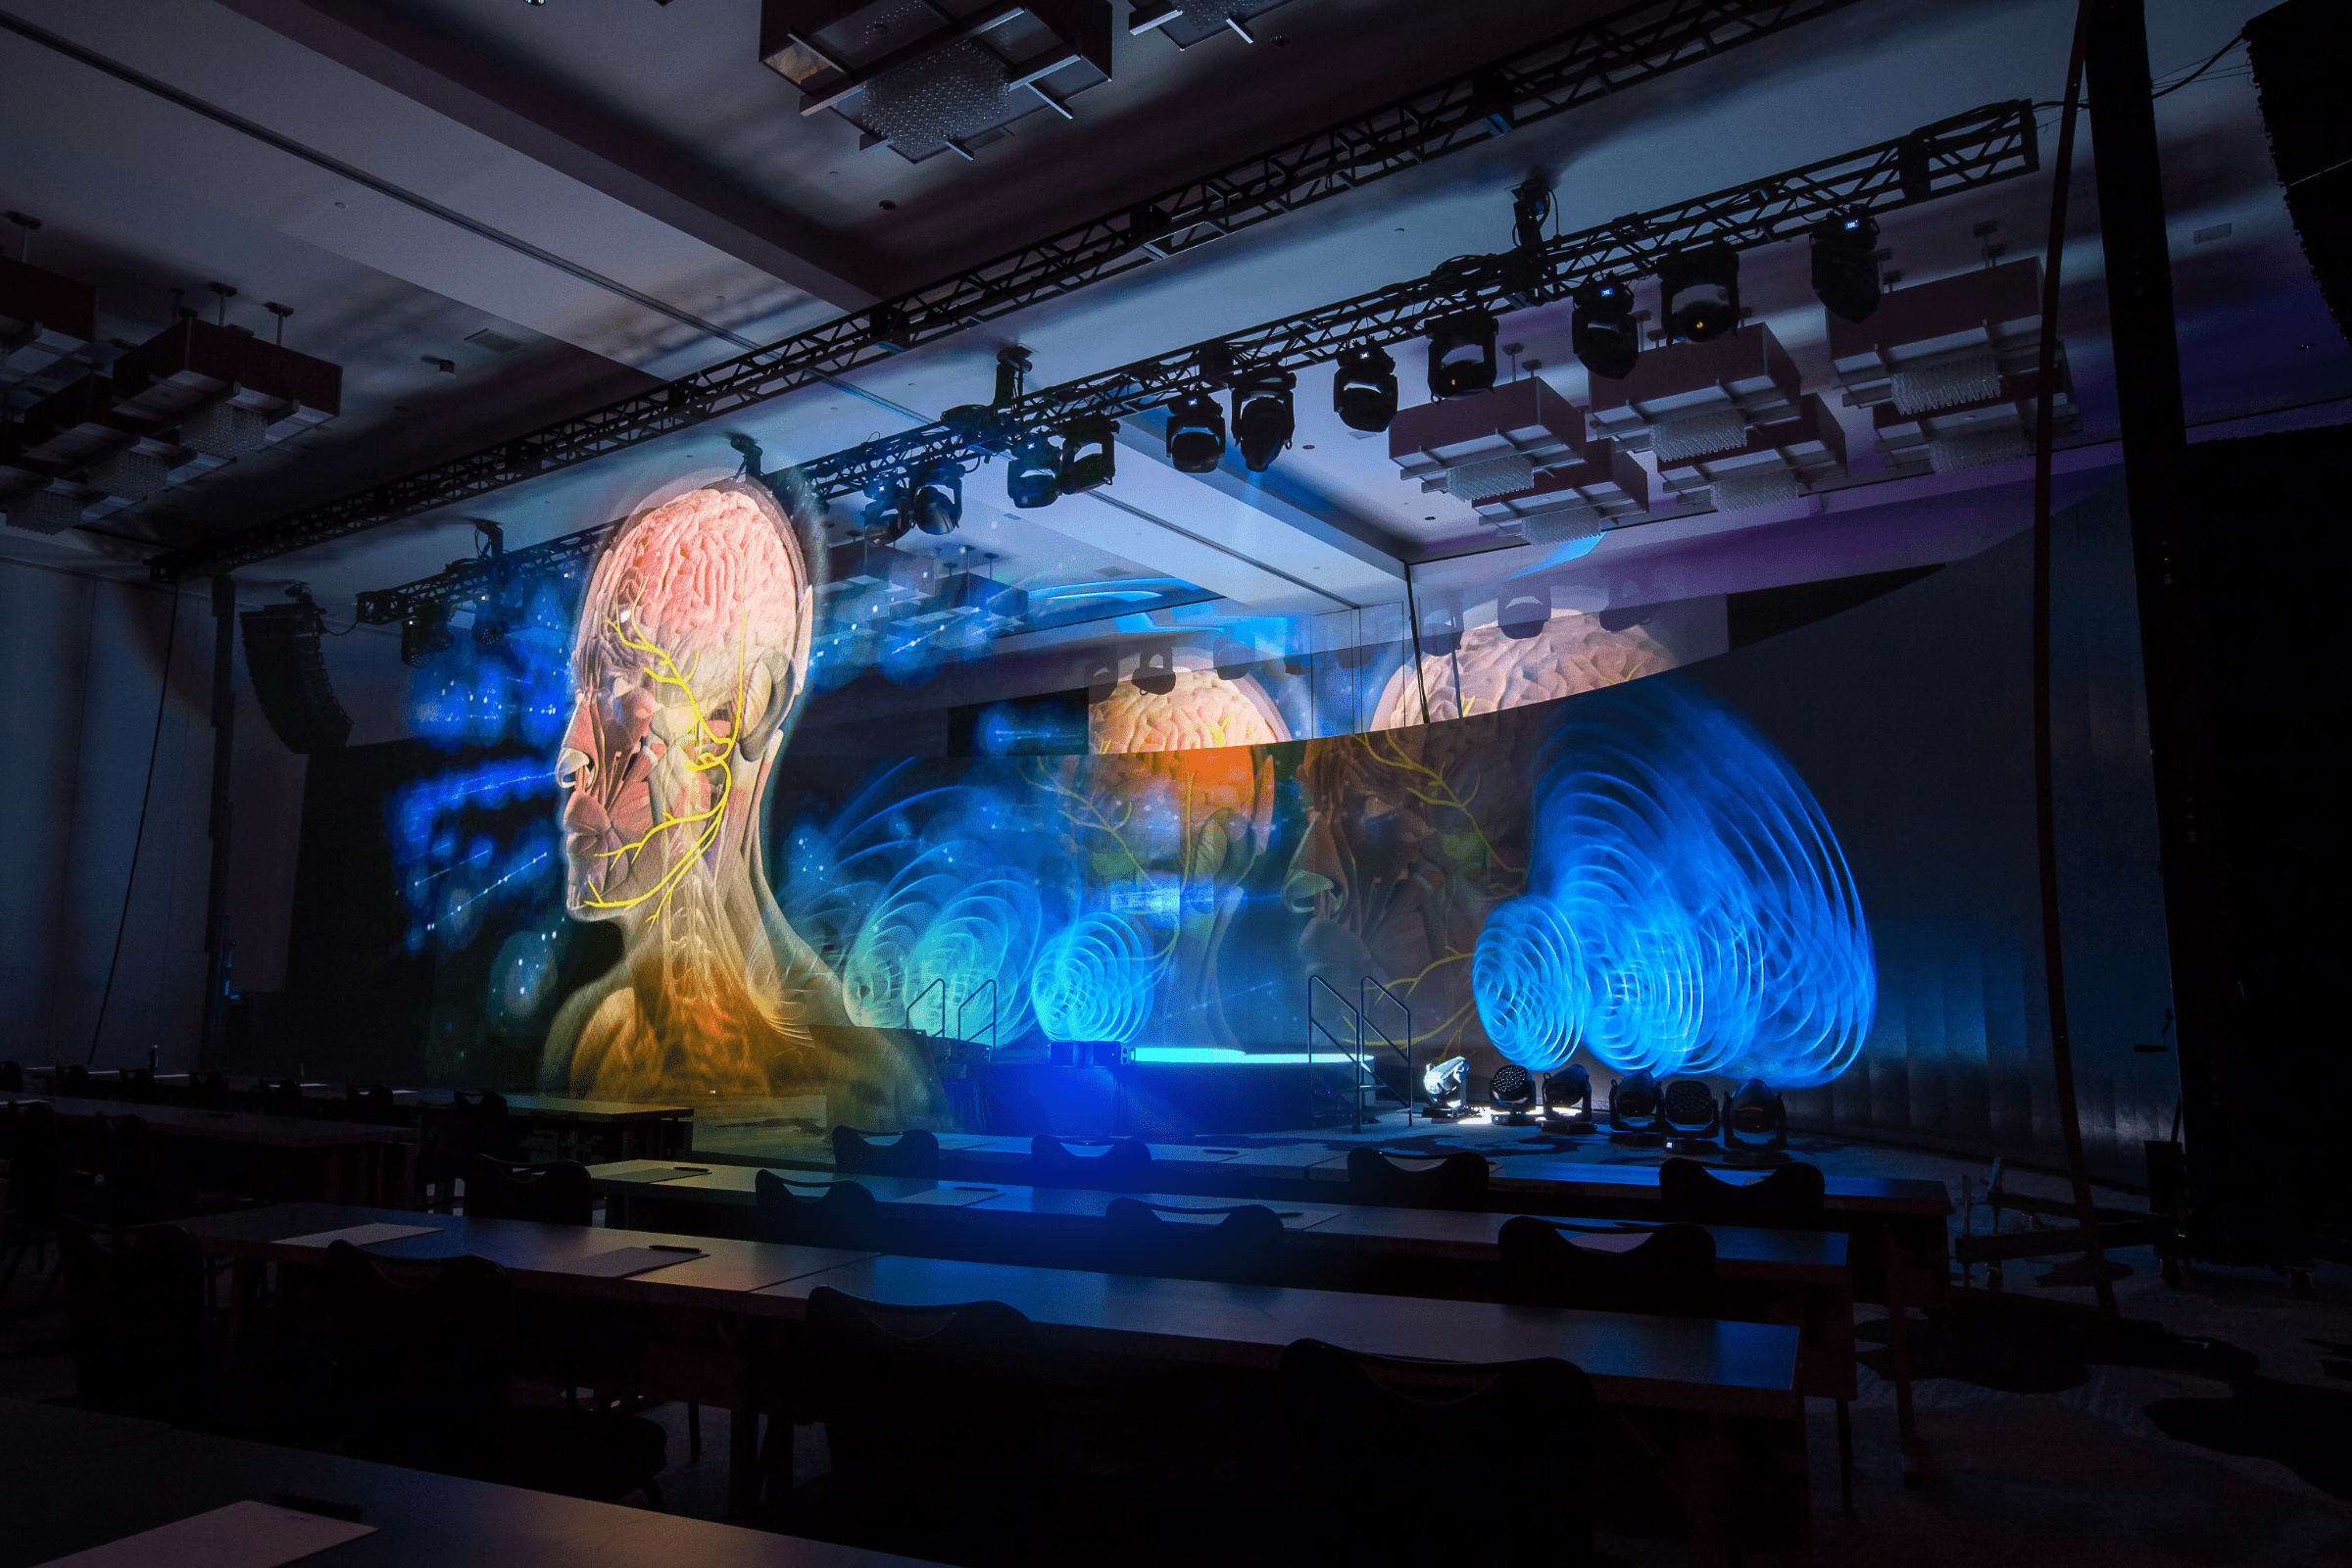 Hologram of human head and brain show in empty conference room in preparation for a medical industry corporate event.